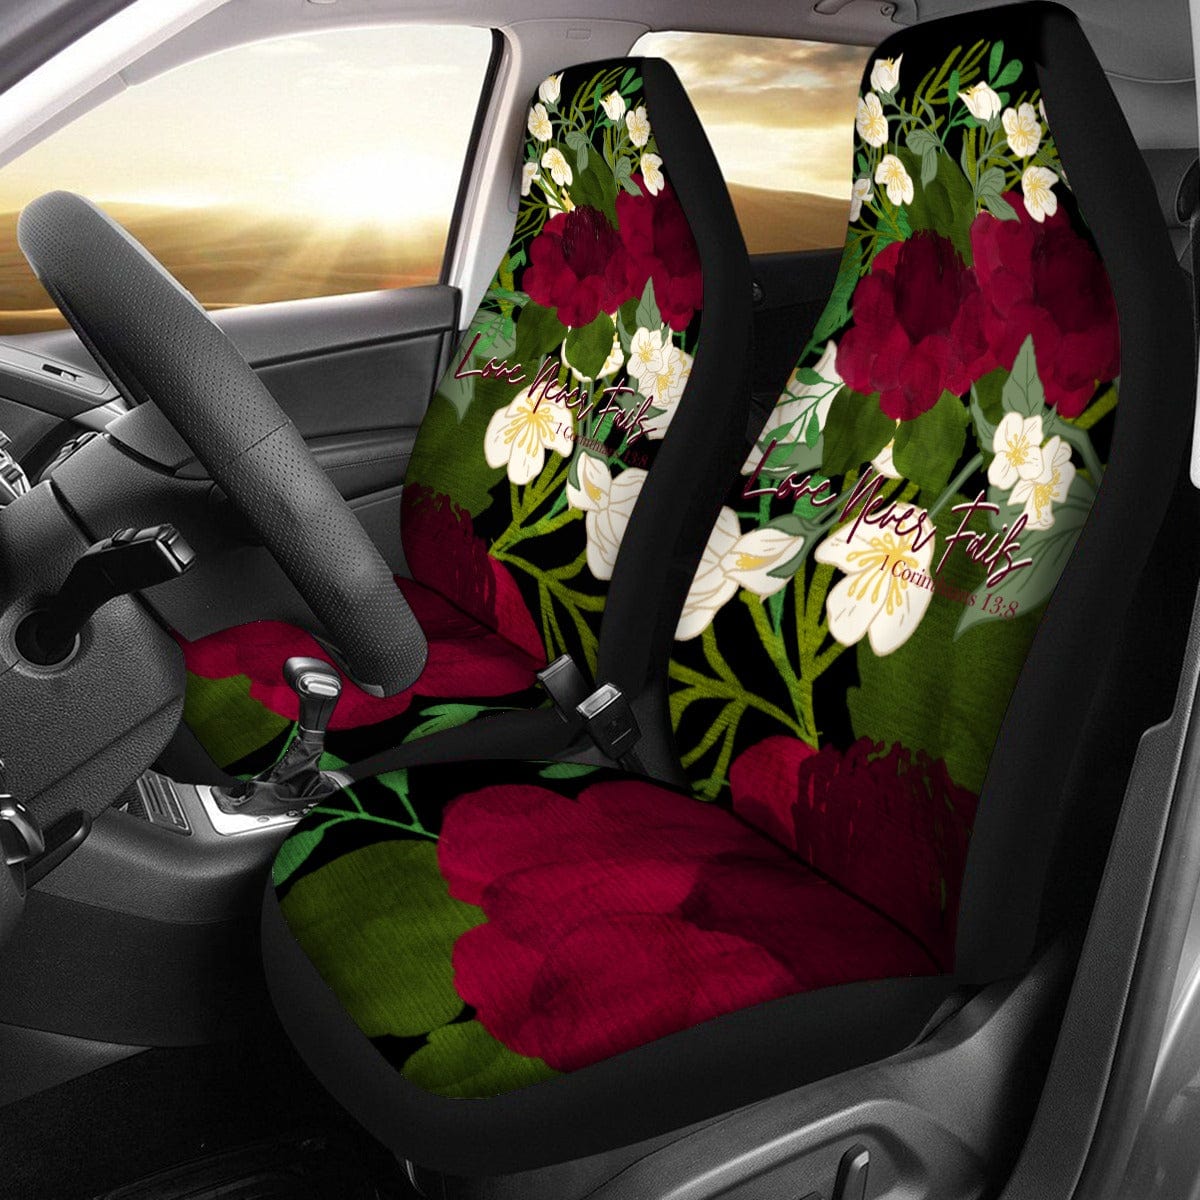 Yoycol U / White Love Never Fails - Bible Verse Universal Car Seat Cover With Thickened Back